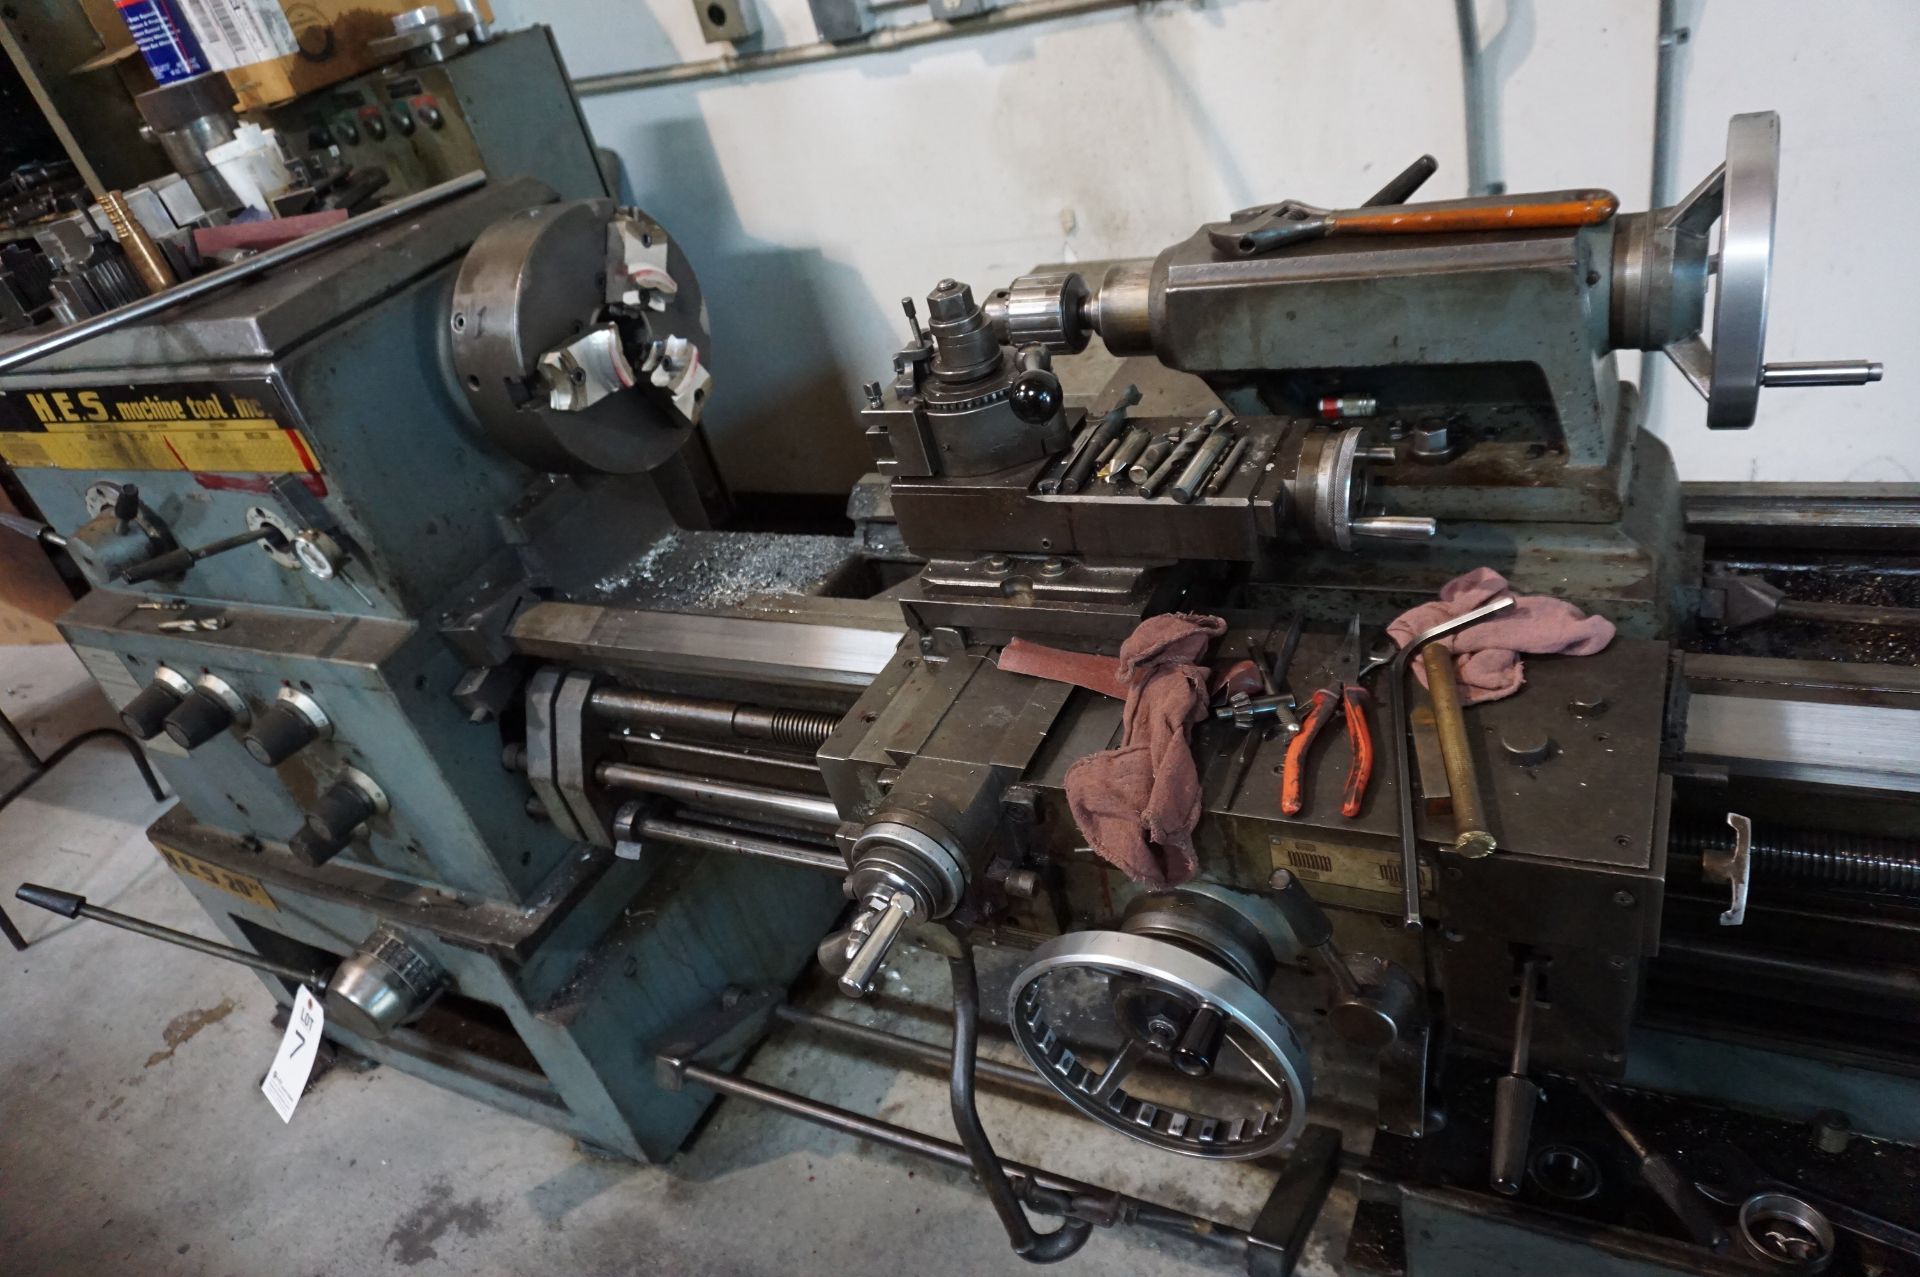 1970 H.E.S. MACHINE LATHE 20" X 80", MODEL 550, S/N 11540 WITH 10" CHUCK, KEYED CHUCK ON TAILSTOCK - Image 3 of 10